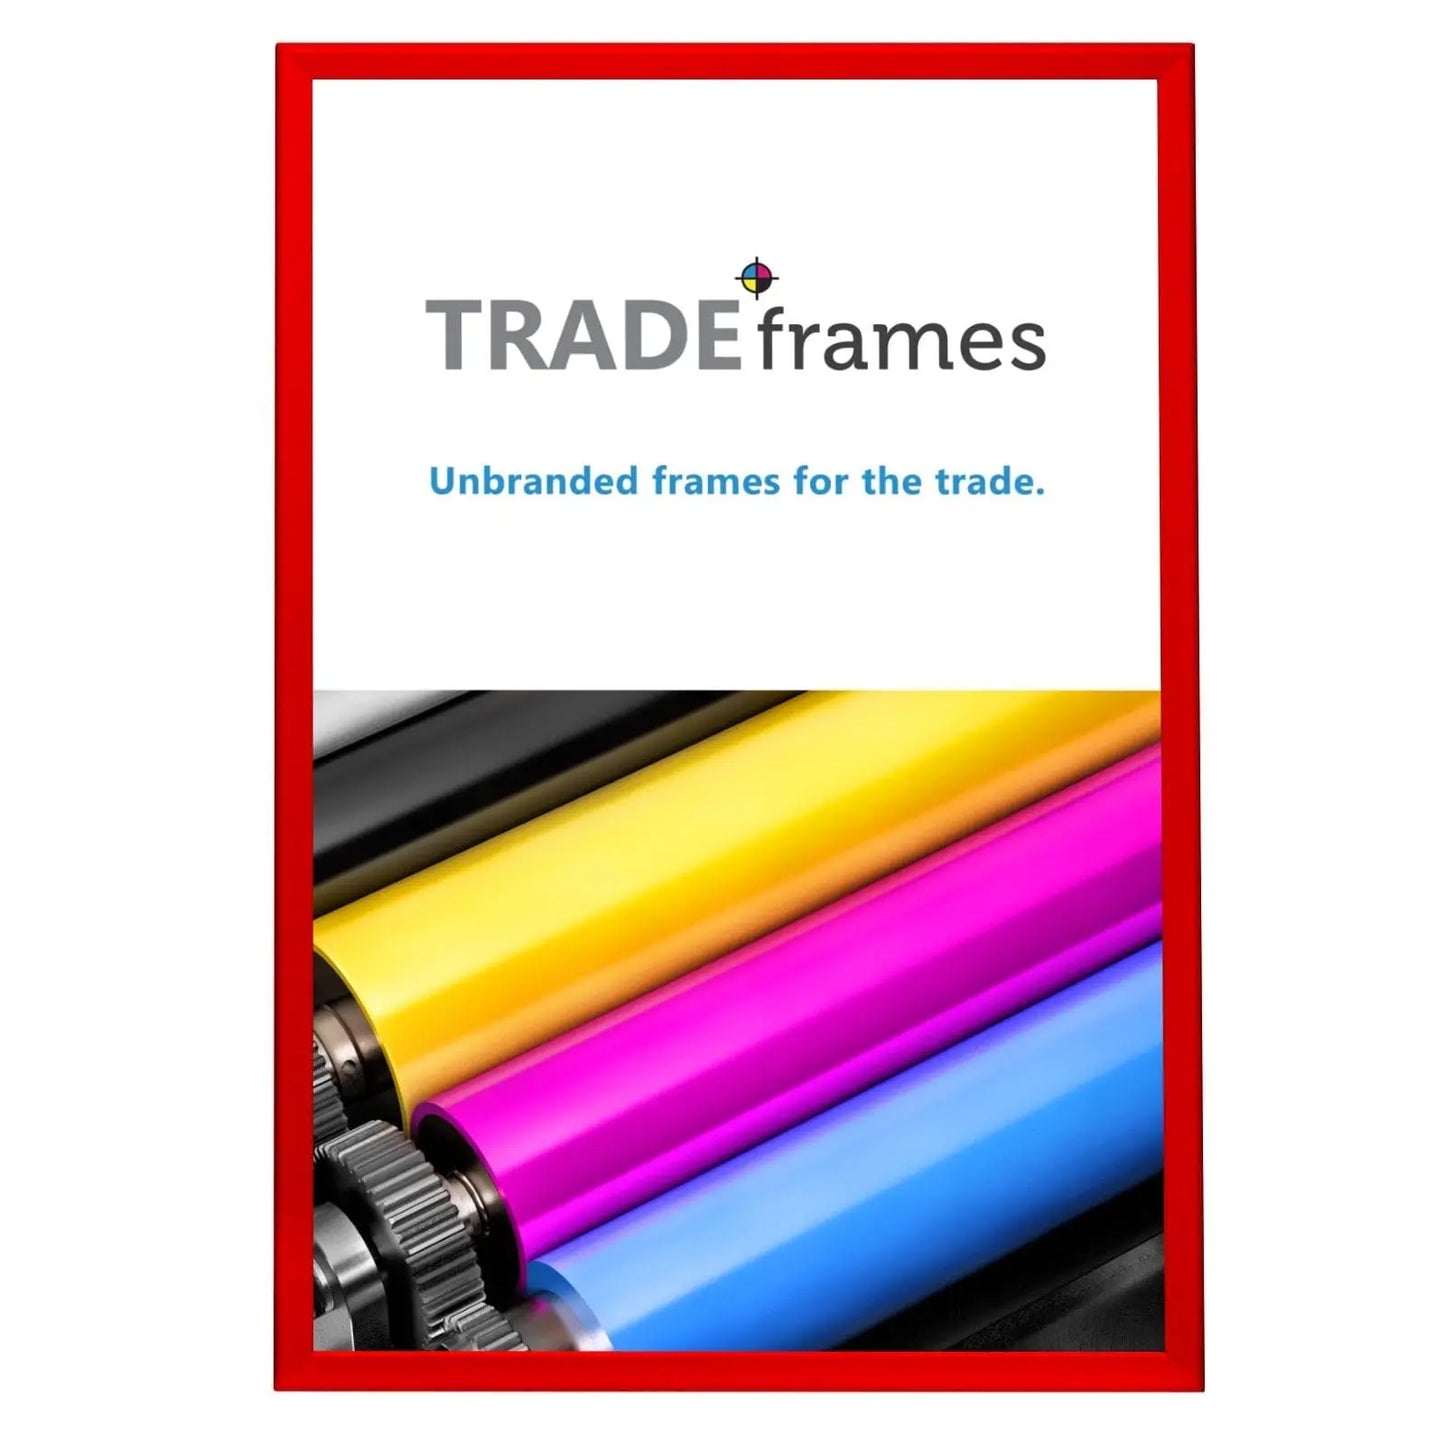 24x36 Inches Red Snap Frame - 1.25" Profile - Snap Frames Direct